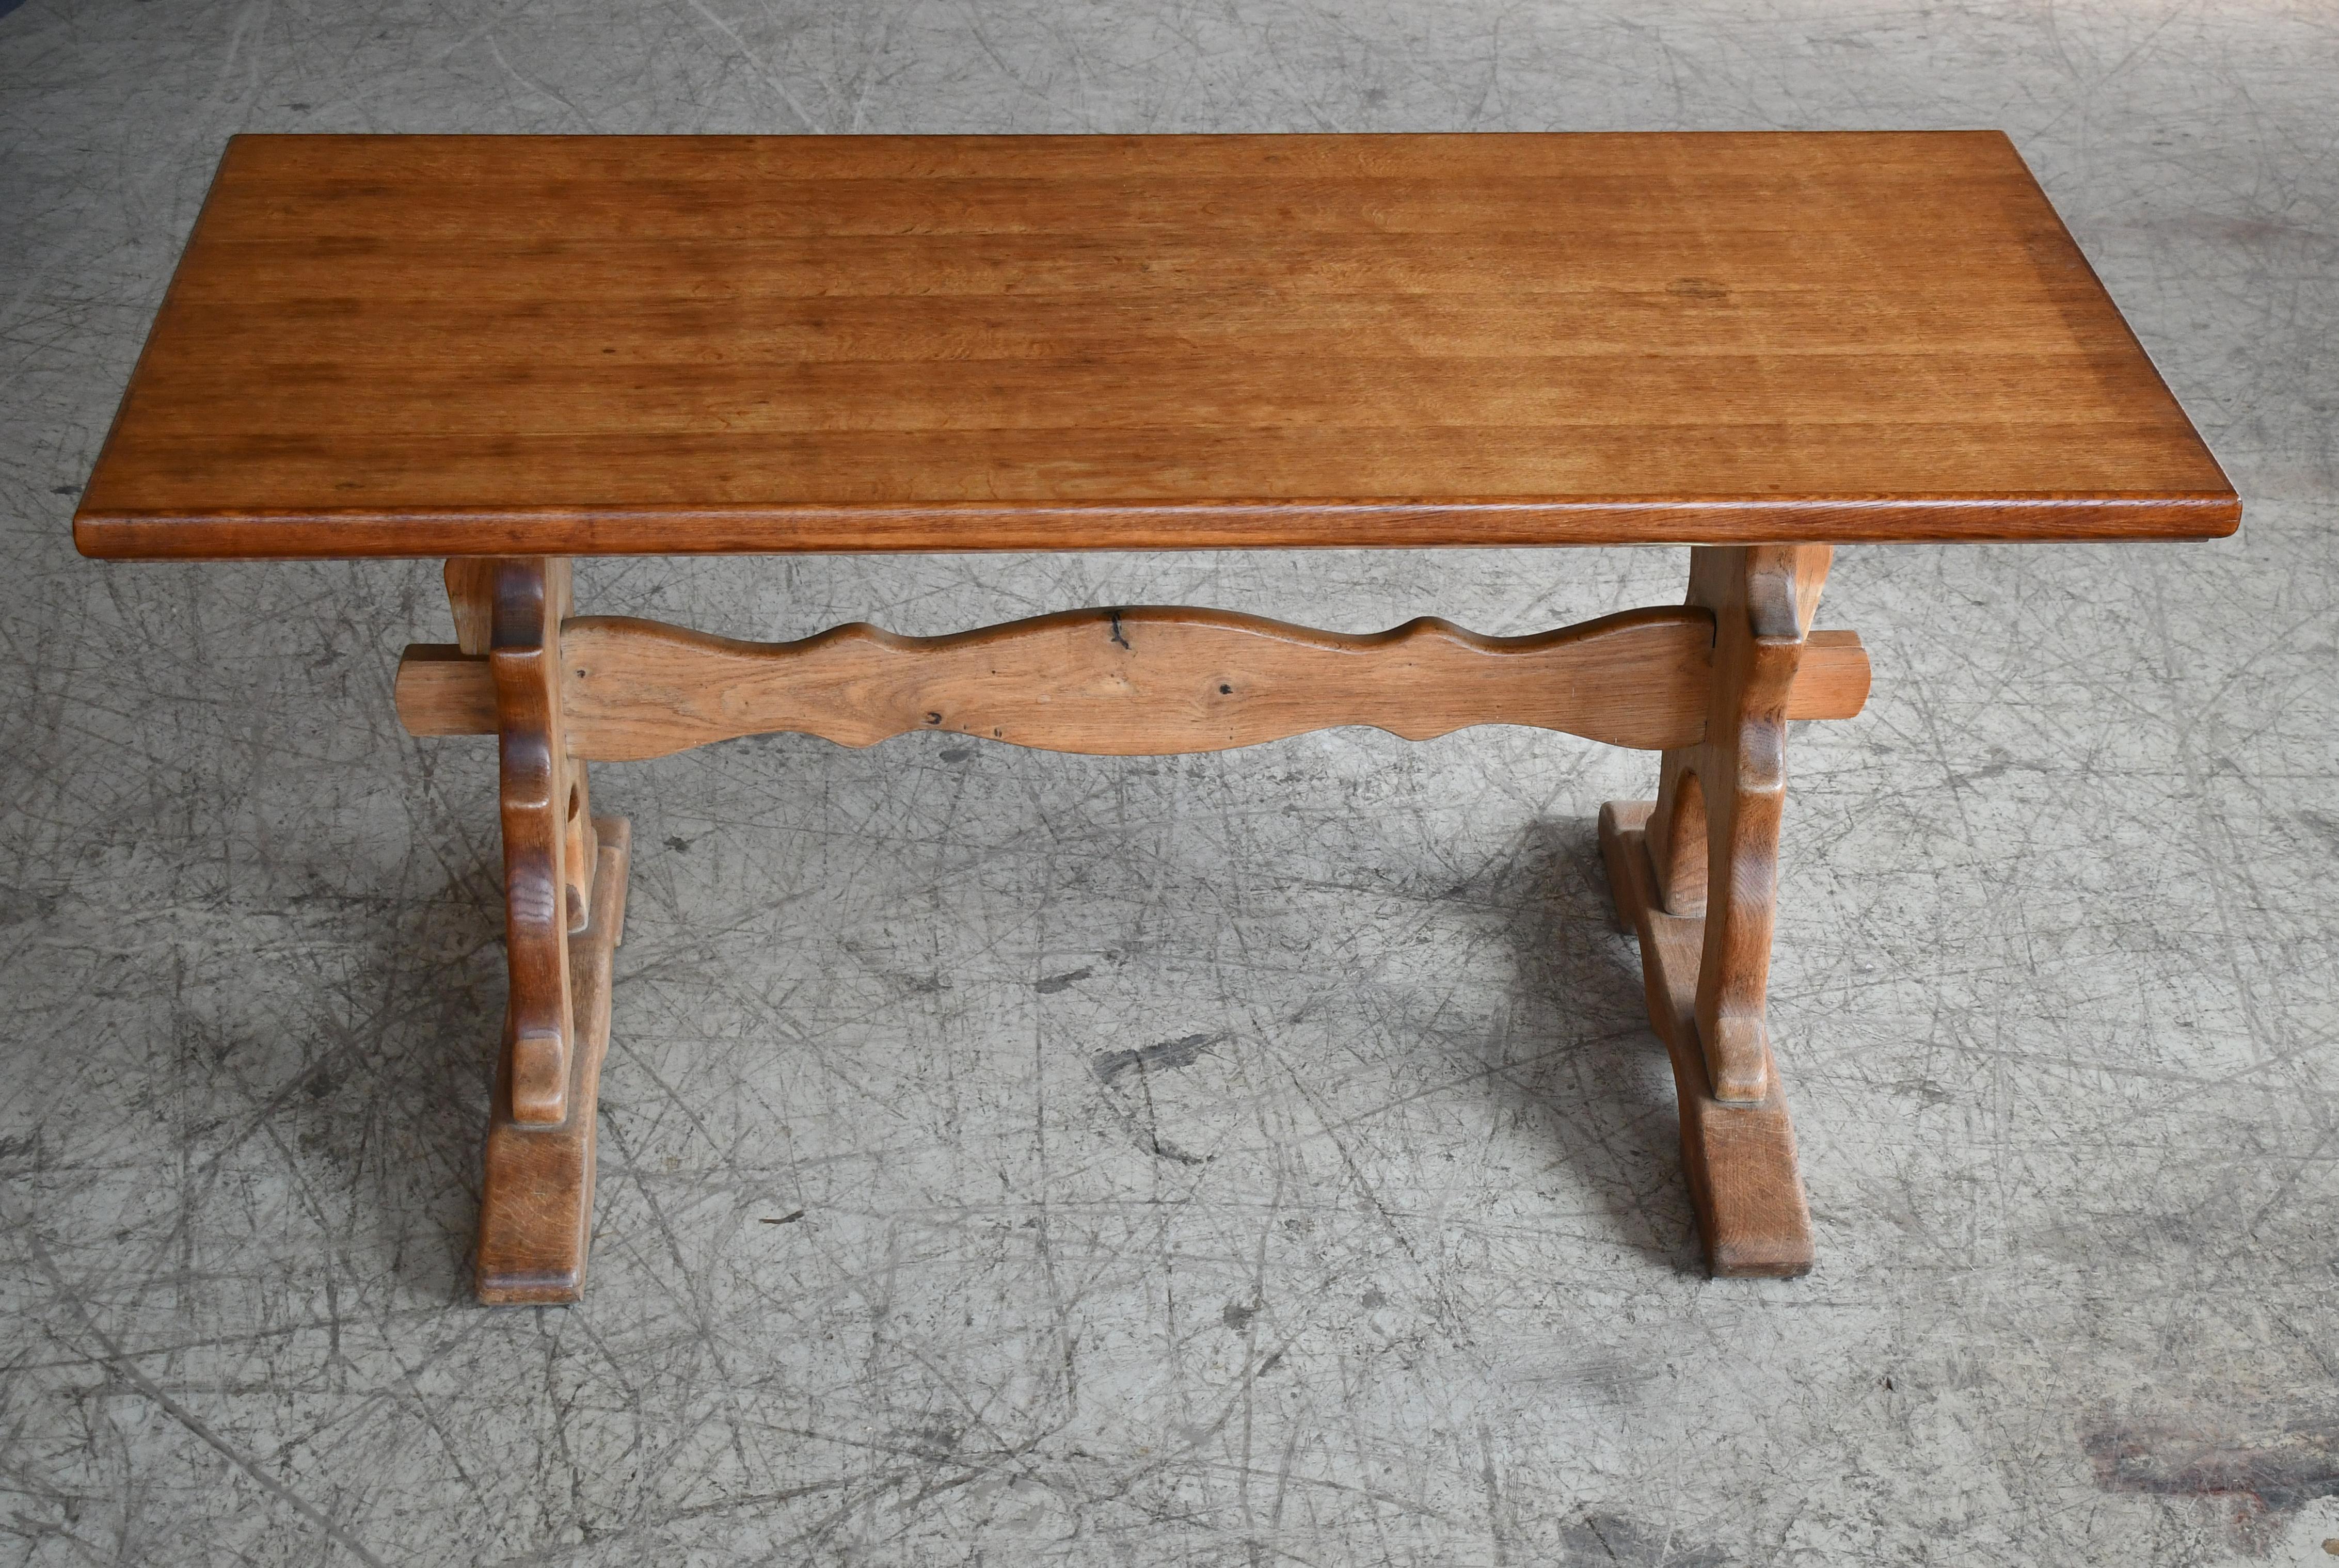 Mid-20th Century Danish Country or Provence Style Dining Table in Solid Oak, ca 1960's